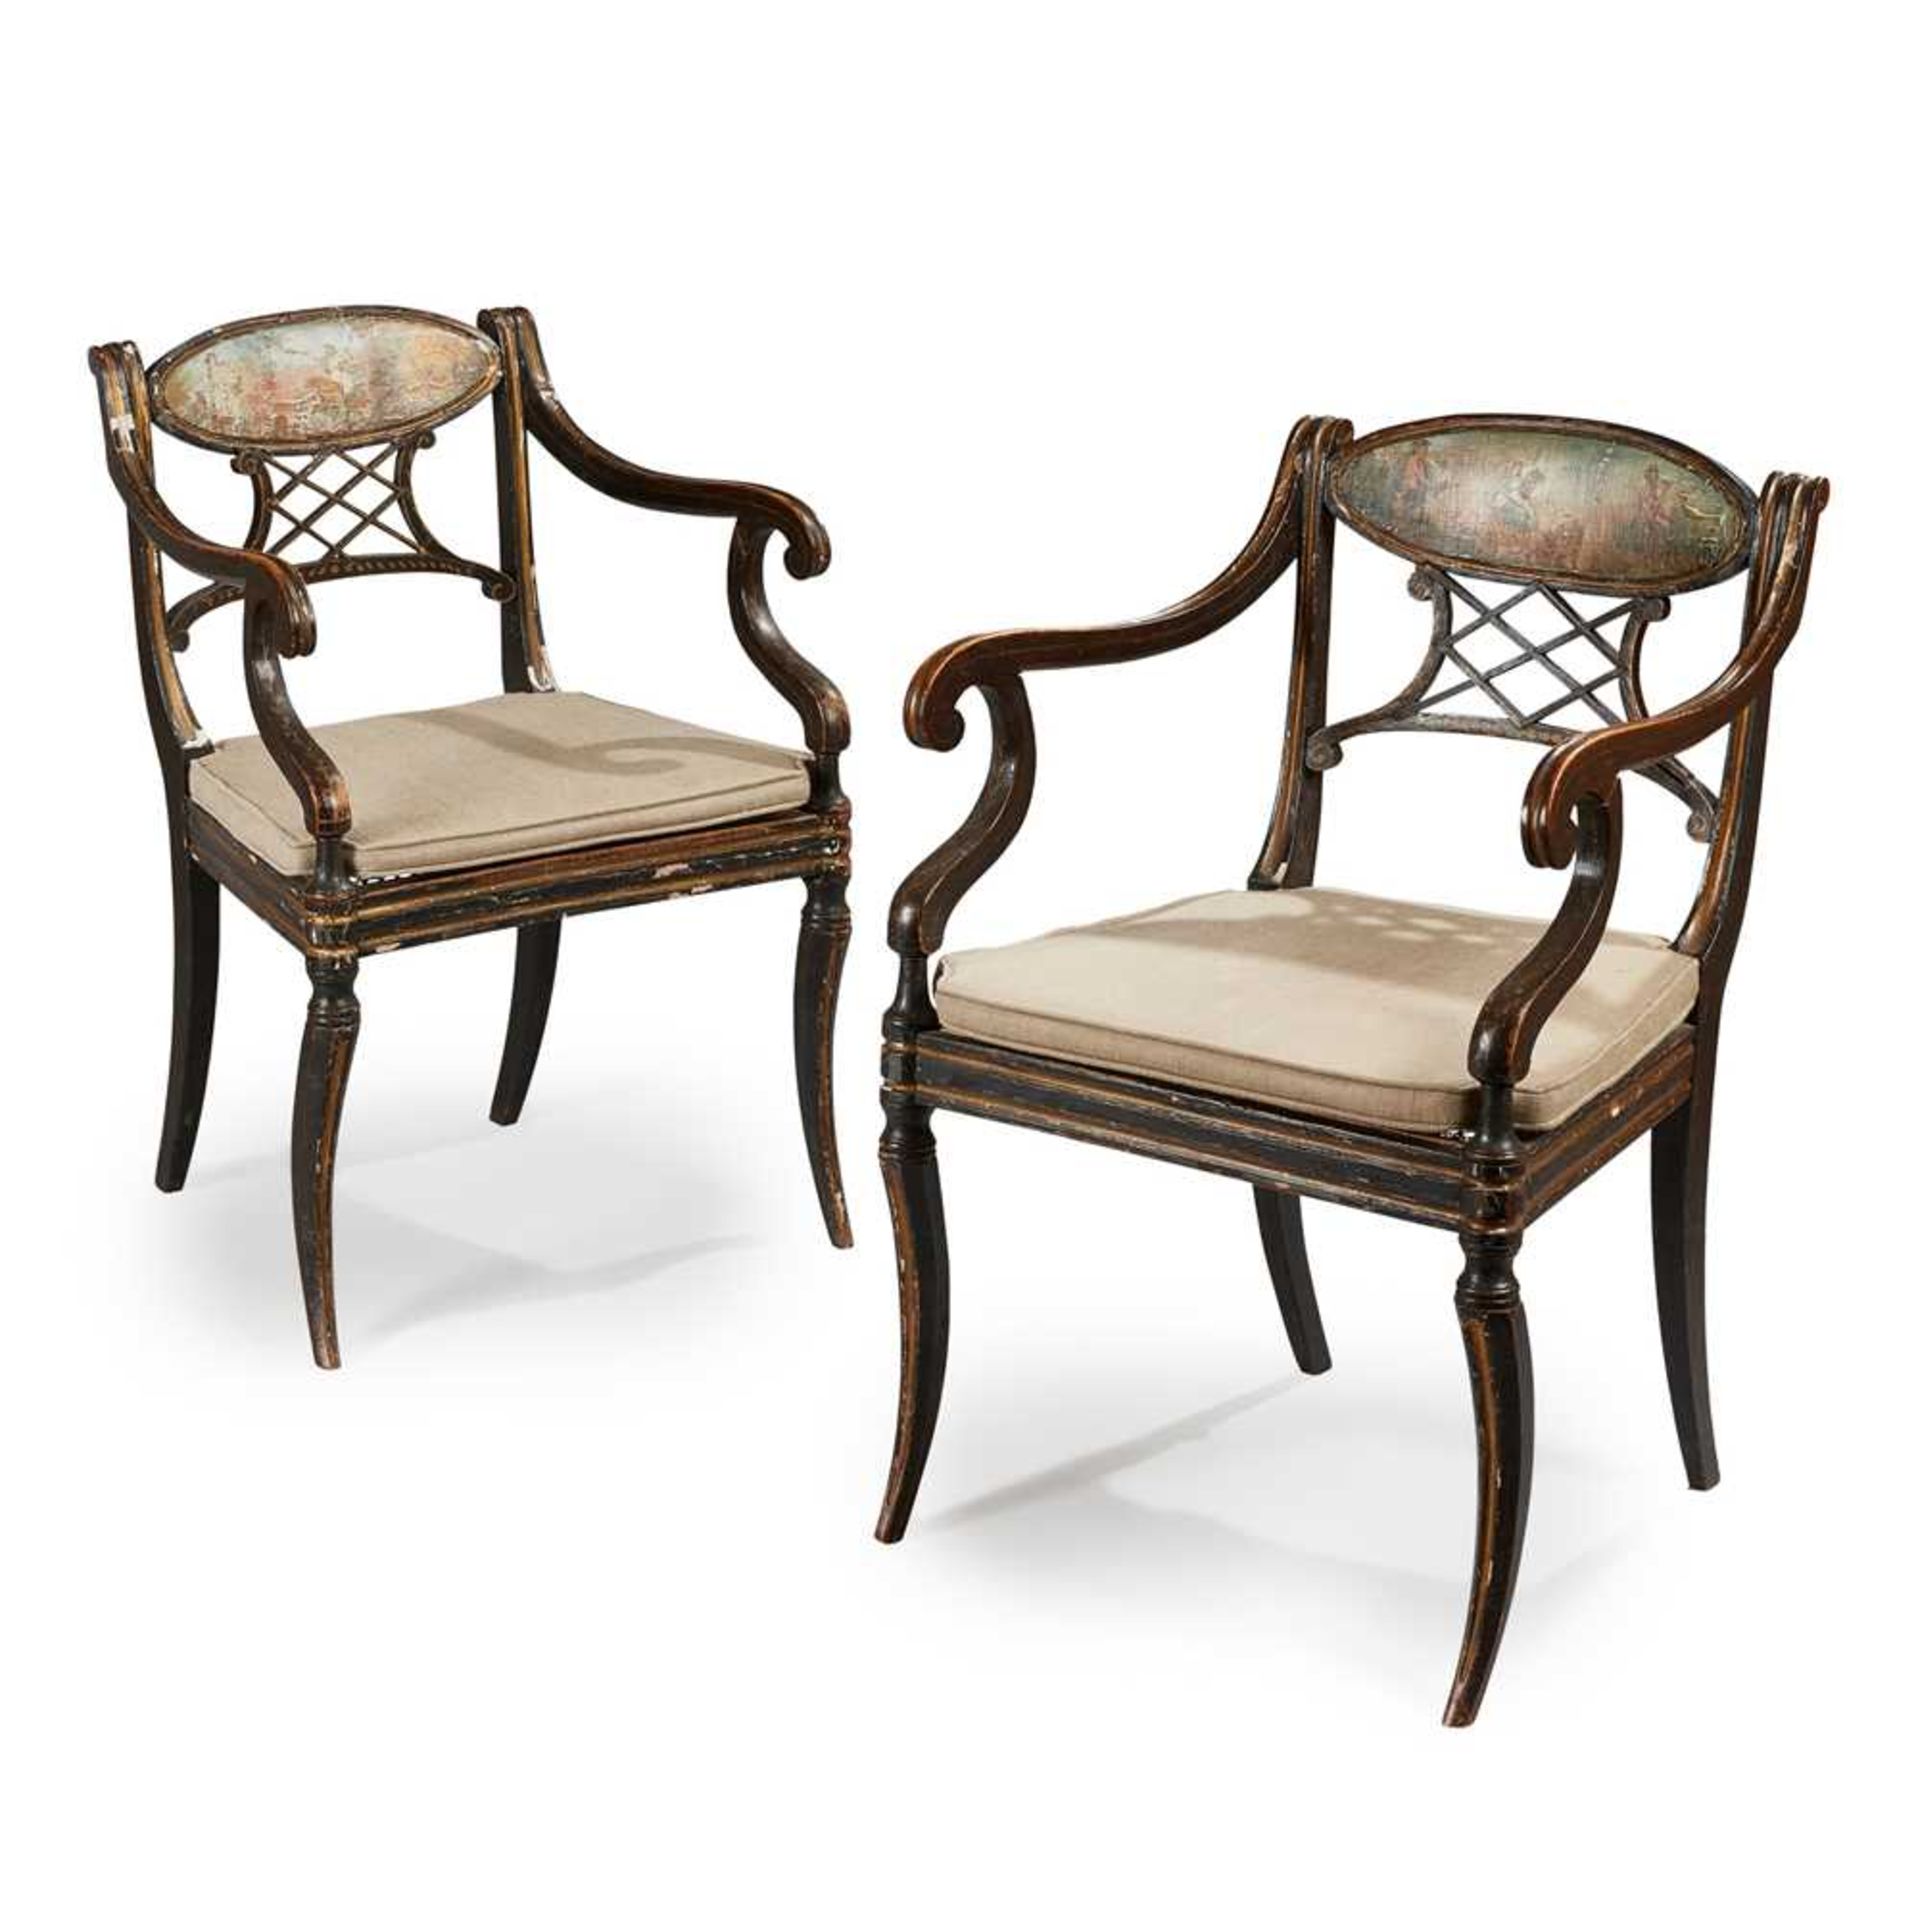 A PAIR OF EARLY REGENCY EBONISED, PAINTED AND GILT OPEN ARMCHAIRS EARLY 19TH CENTURY